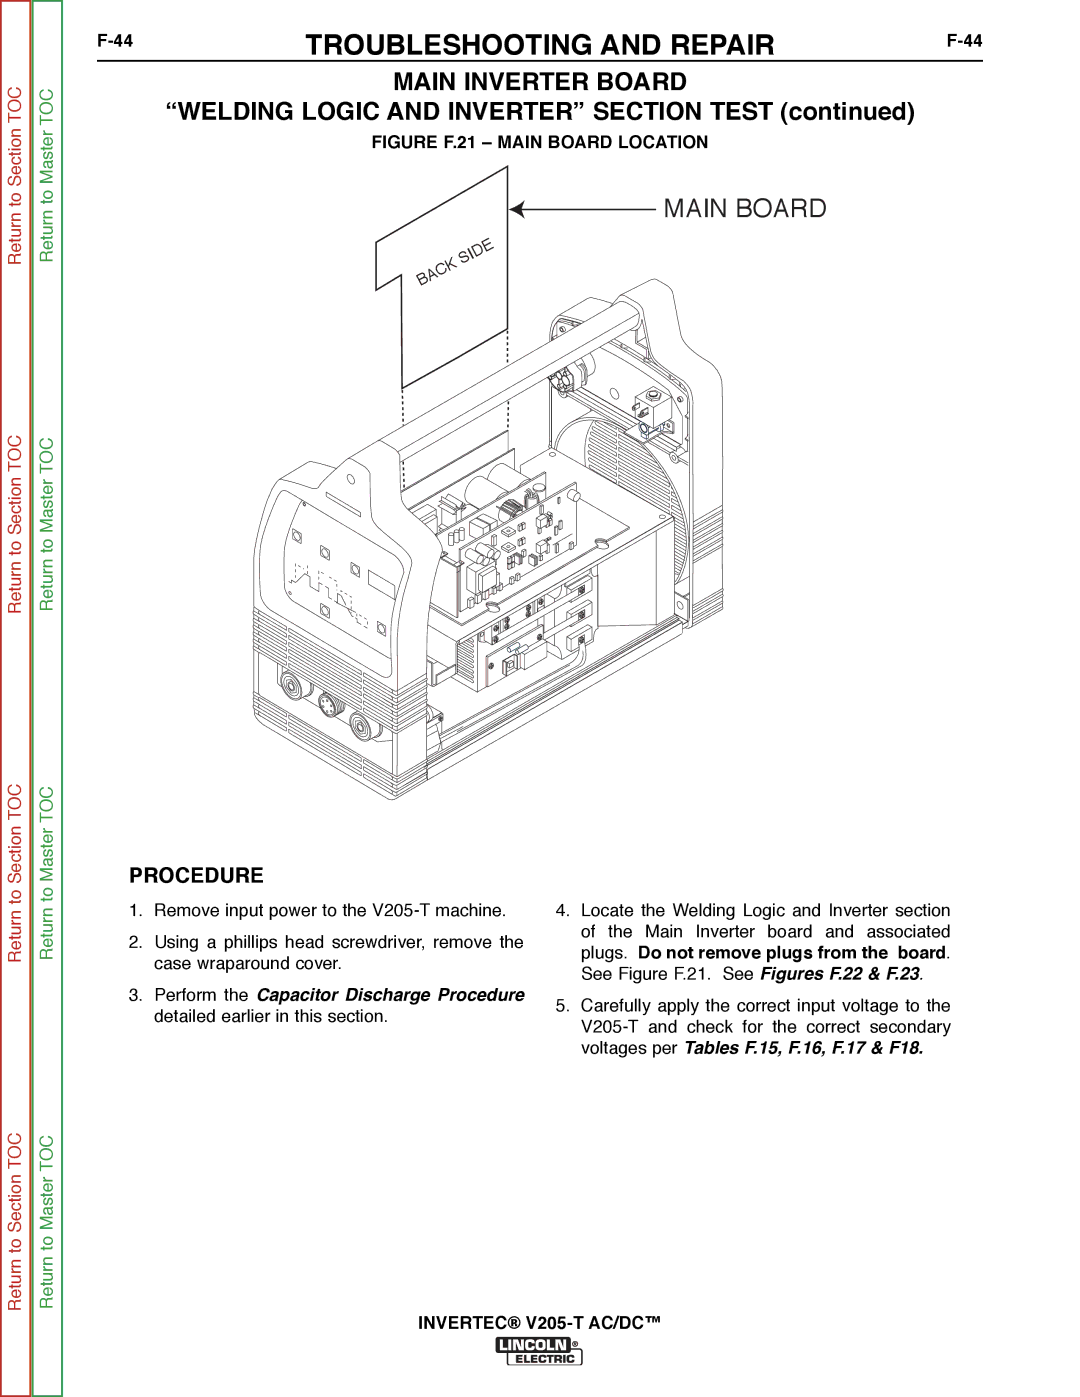 Lincoln Electric SVM161-A service manual Main Inverter Board, Welding Logic and Inverter Section Test 